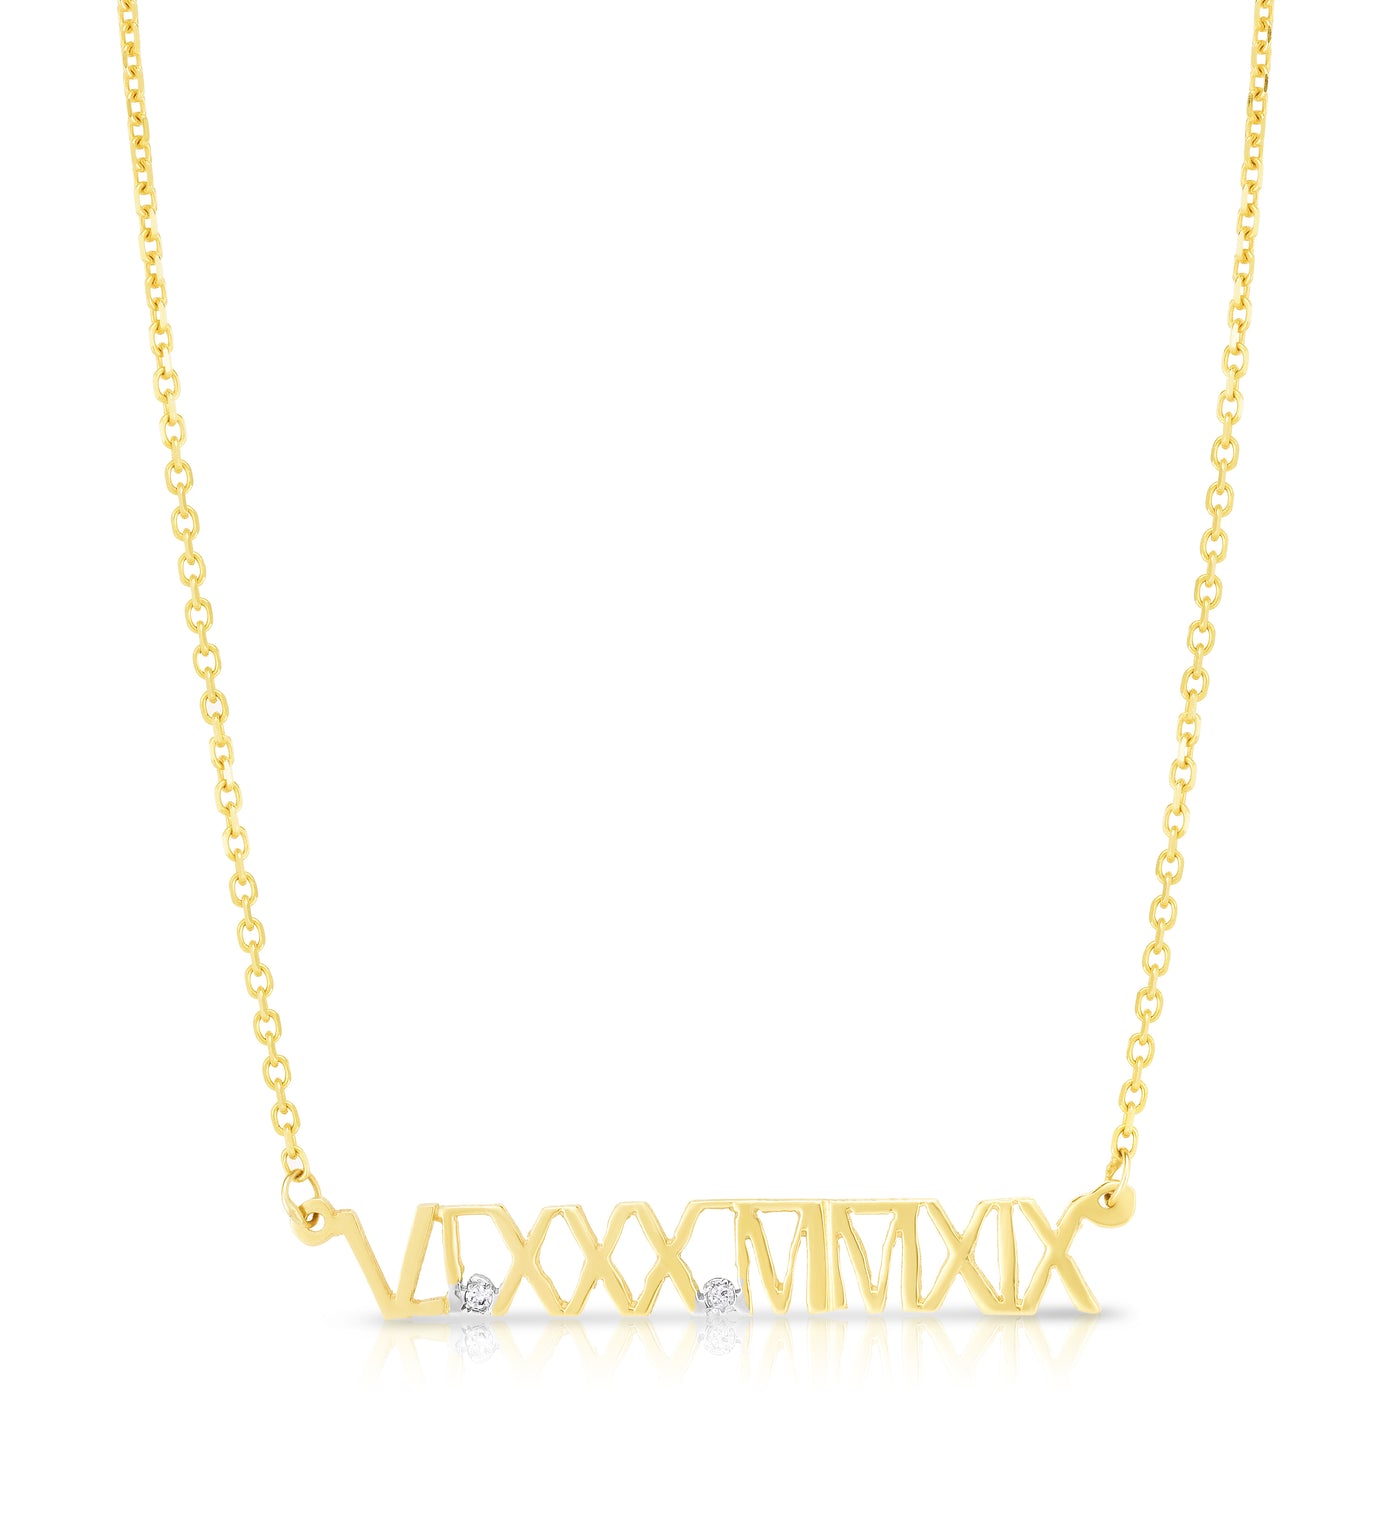 IVY - The Roman Numeral Necklace